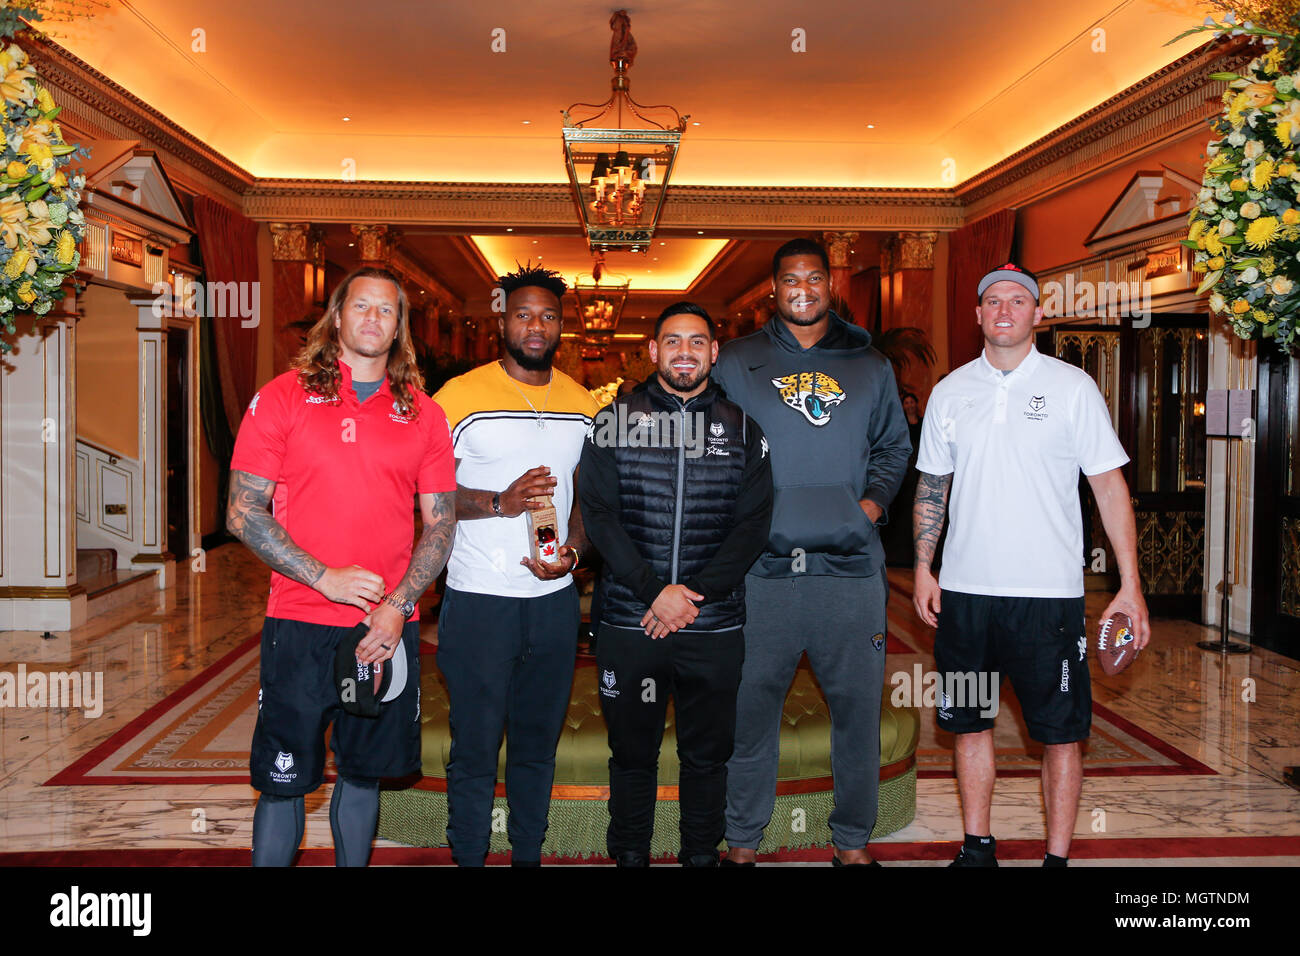 London, UK. . 29th Apr, 2018. Ashton Sims (Toronto Wolfpack), Yannick Ngakoue ( Jacksonville Jaguars), Reni Maitua (Toronto Wolfpack), Calais Campbell ( Jacksonville Jaguars) and Cory Patterson (Toronto Wolpack) (Left to Right) During the Press Launch between the Toronto Wolfpack and the Jacksonville Jaguars at the Dorchester, 53 Park Lane, London  Picture by Stephen Gaunt/Alamy Live News +447904 833202 29/04/18 Credit: Stephen Gaunt/Alamy Live News Stock Photo